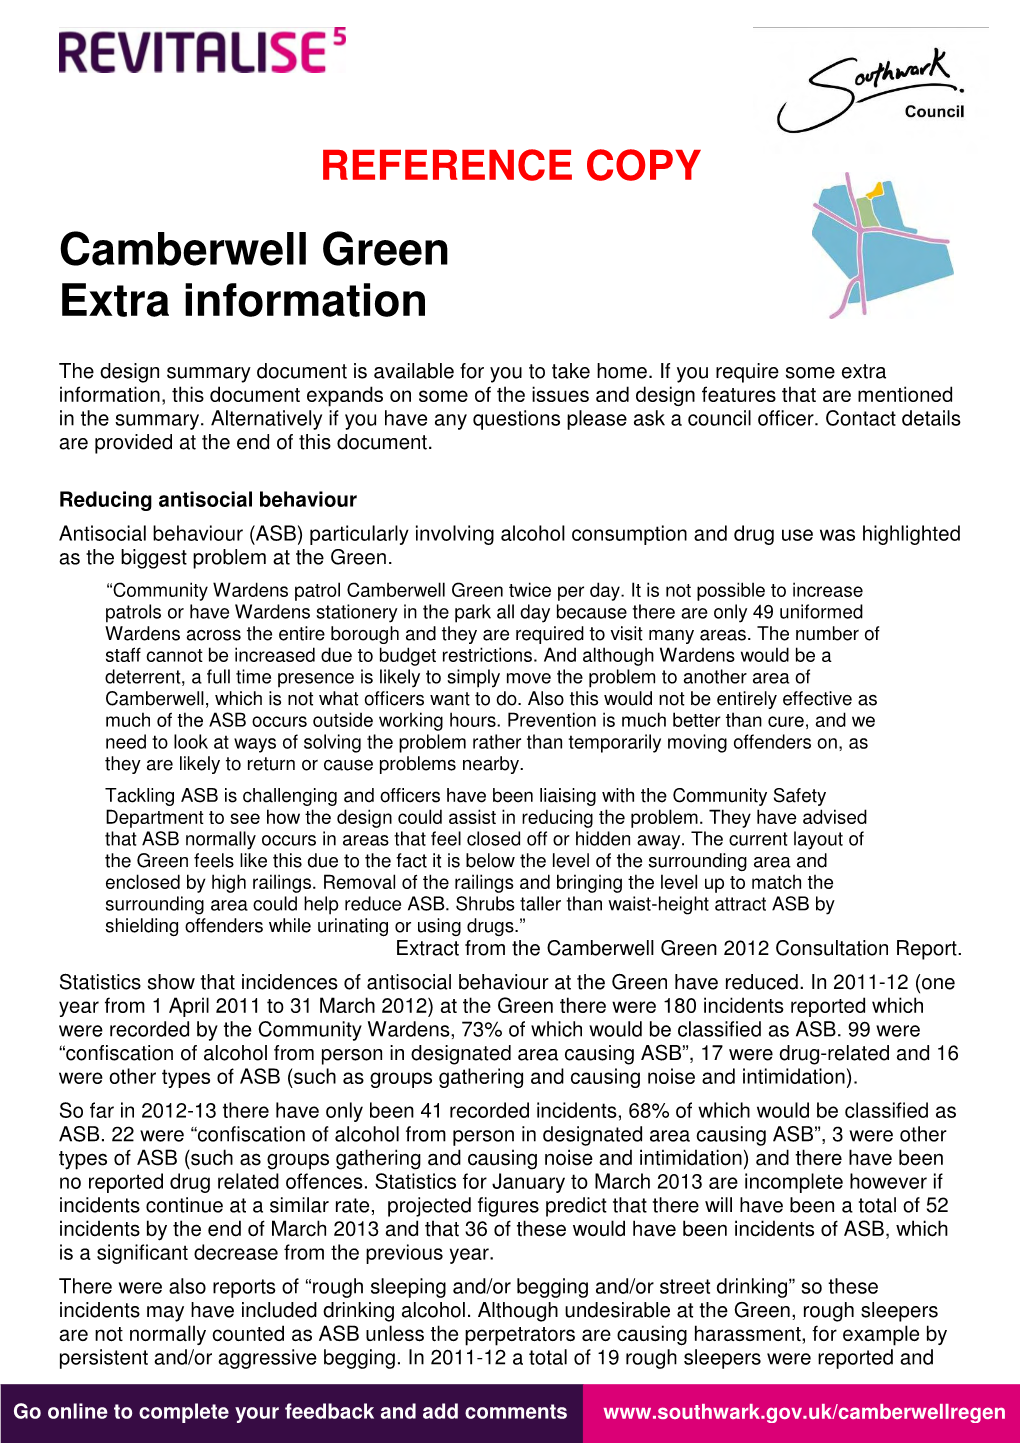 Camberwell Green Extra Information